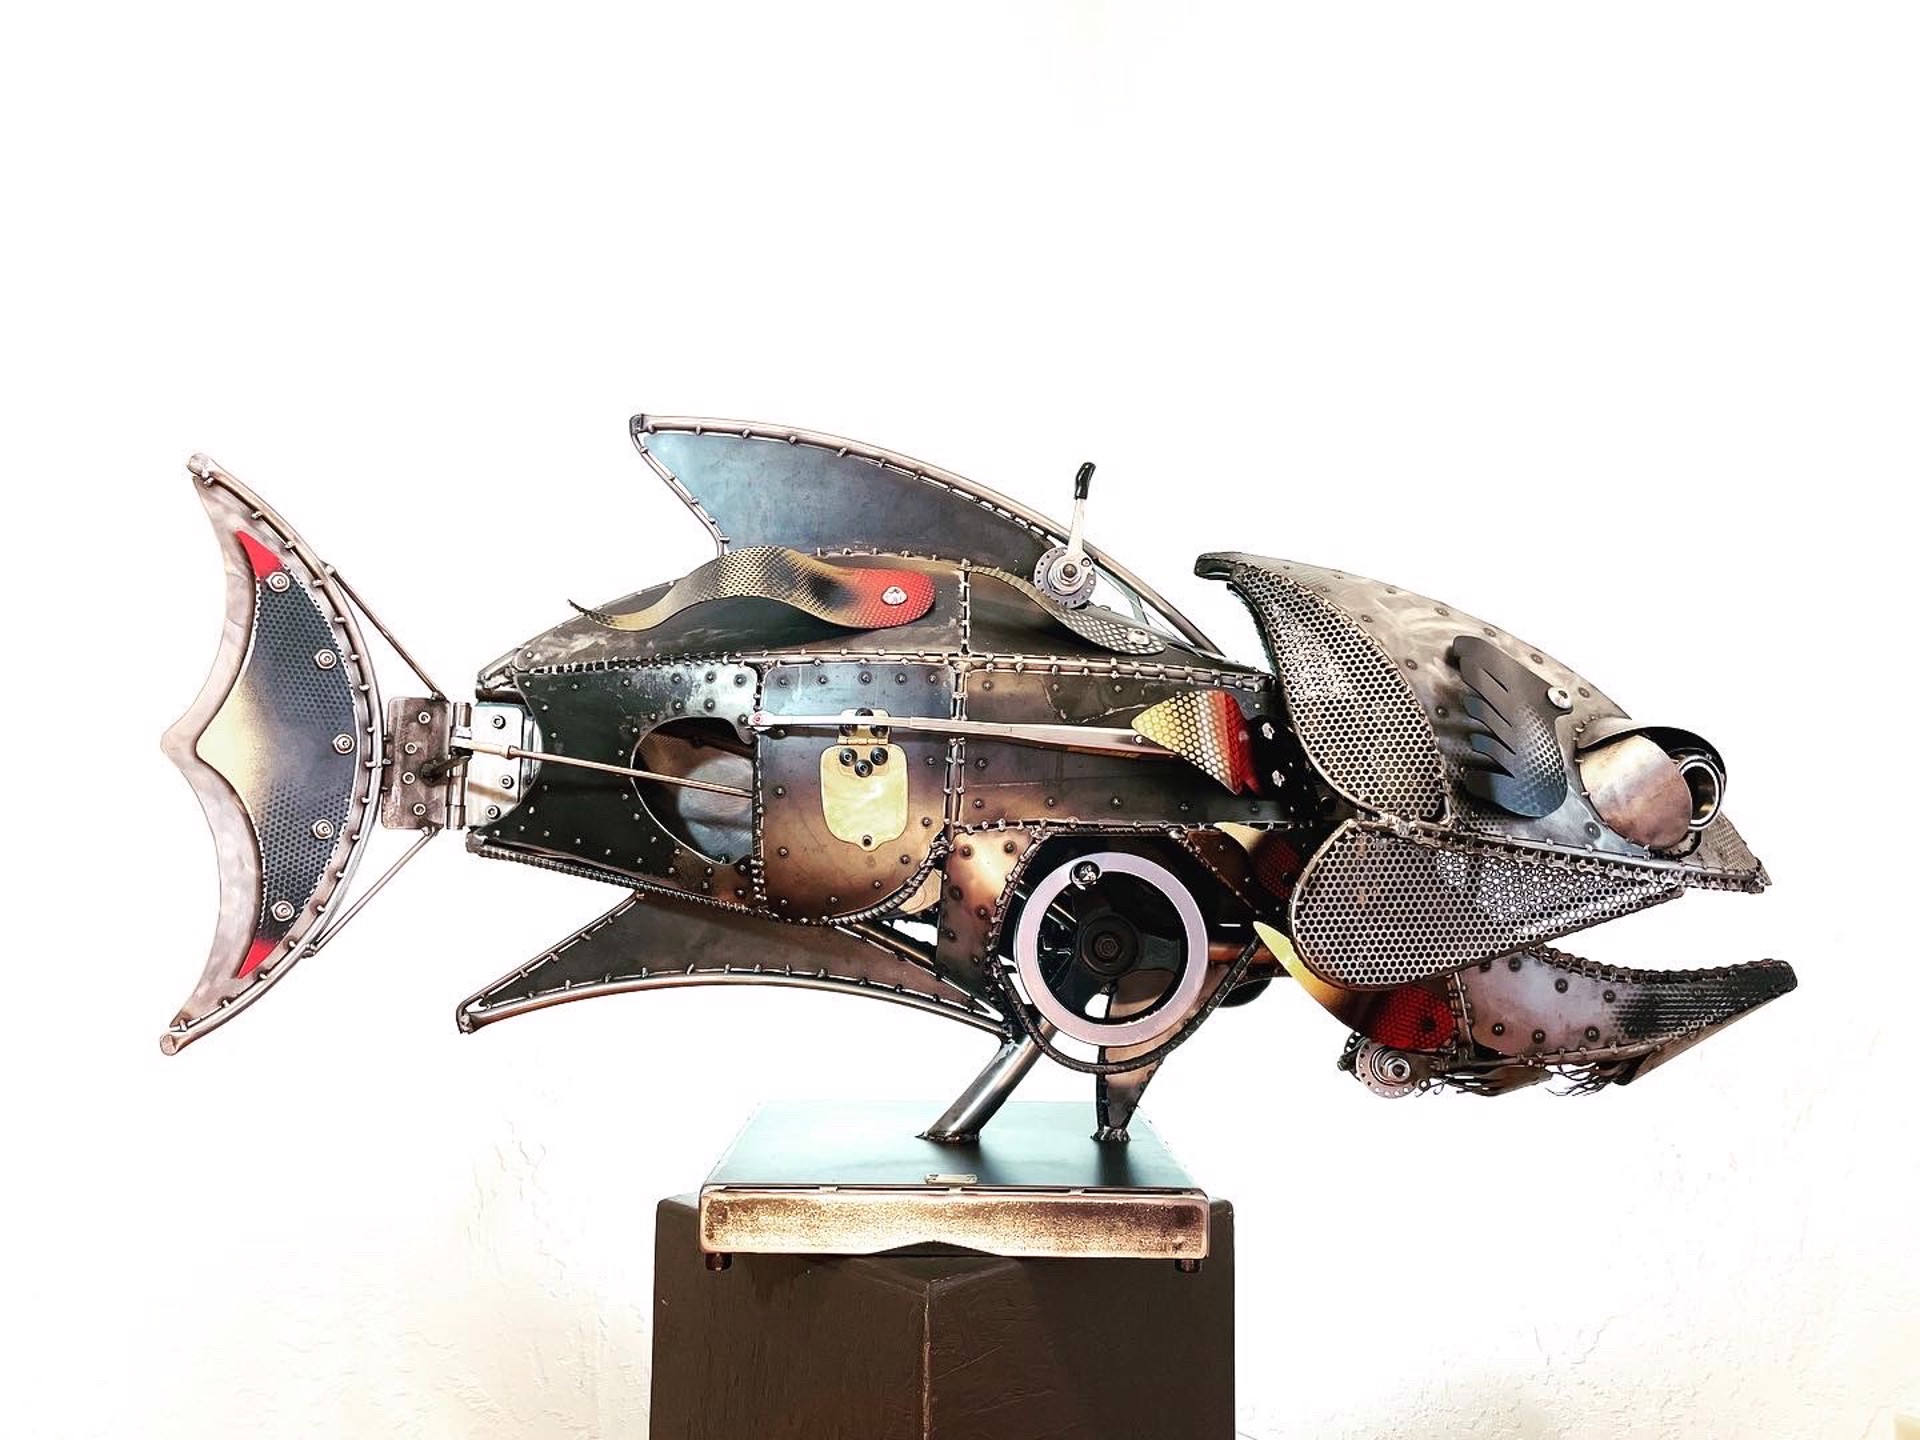 Frank (Hand-Crank Kinetic Fish) by Chris Cole